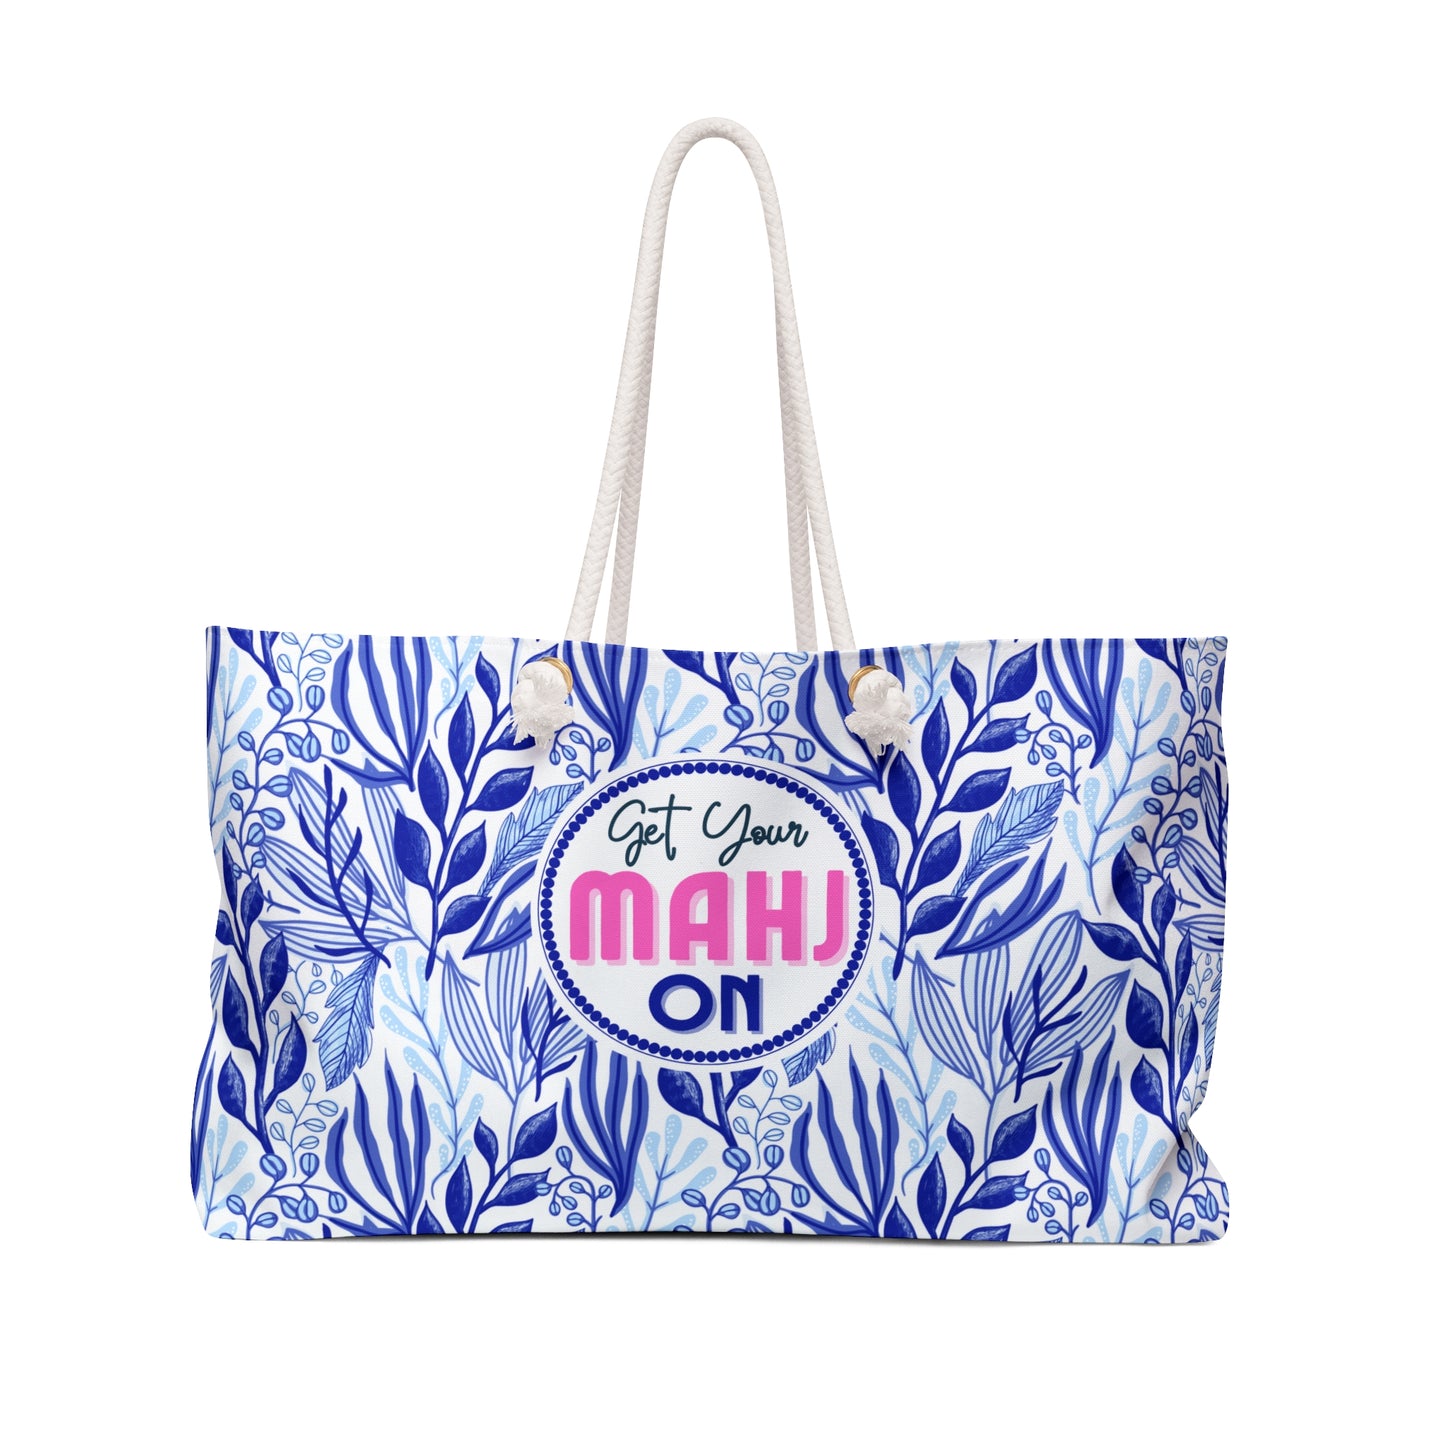 Mahjong Tote Bag. Oversize Carrying Bag to Hold Your Mahjongg Tiles, Mah Jongg Accessories and More. Blue Nature Pattern.